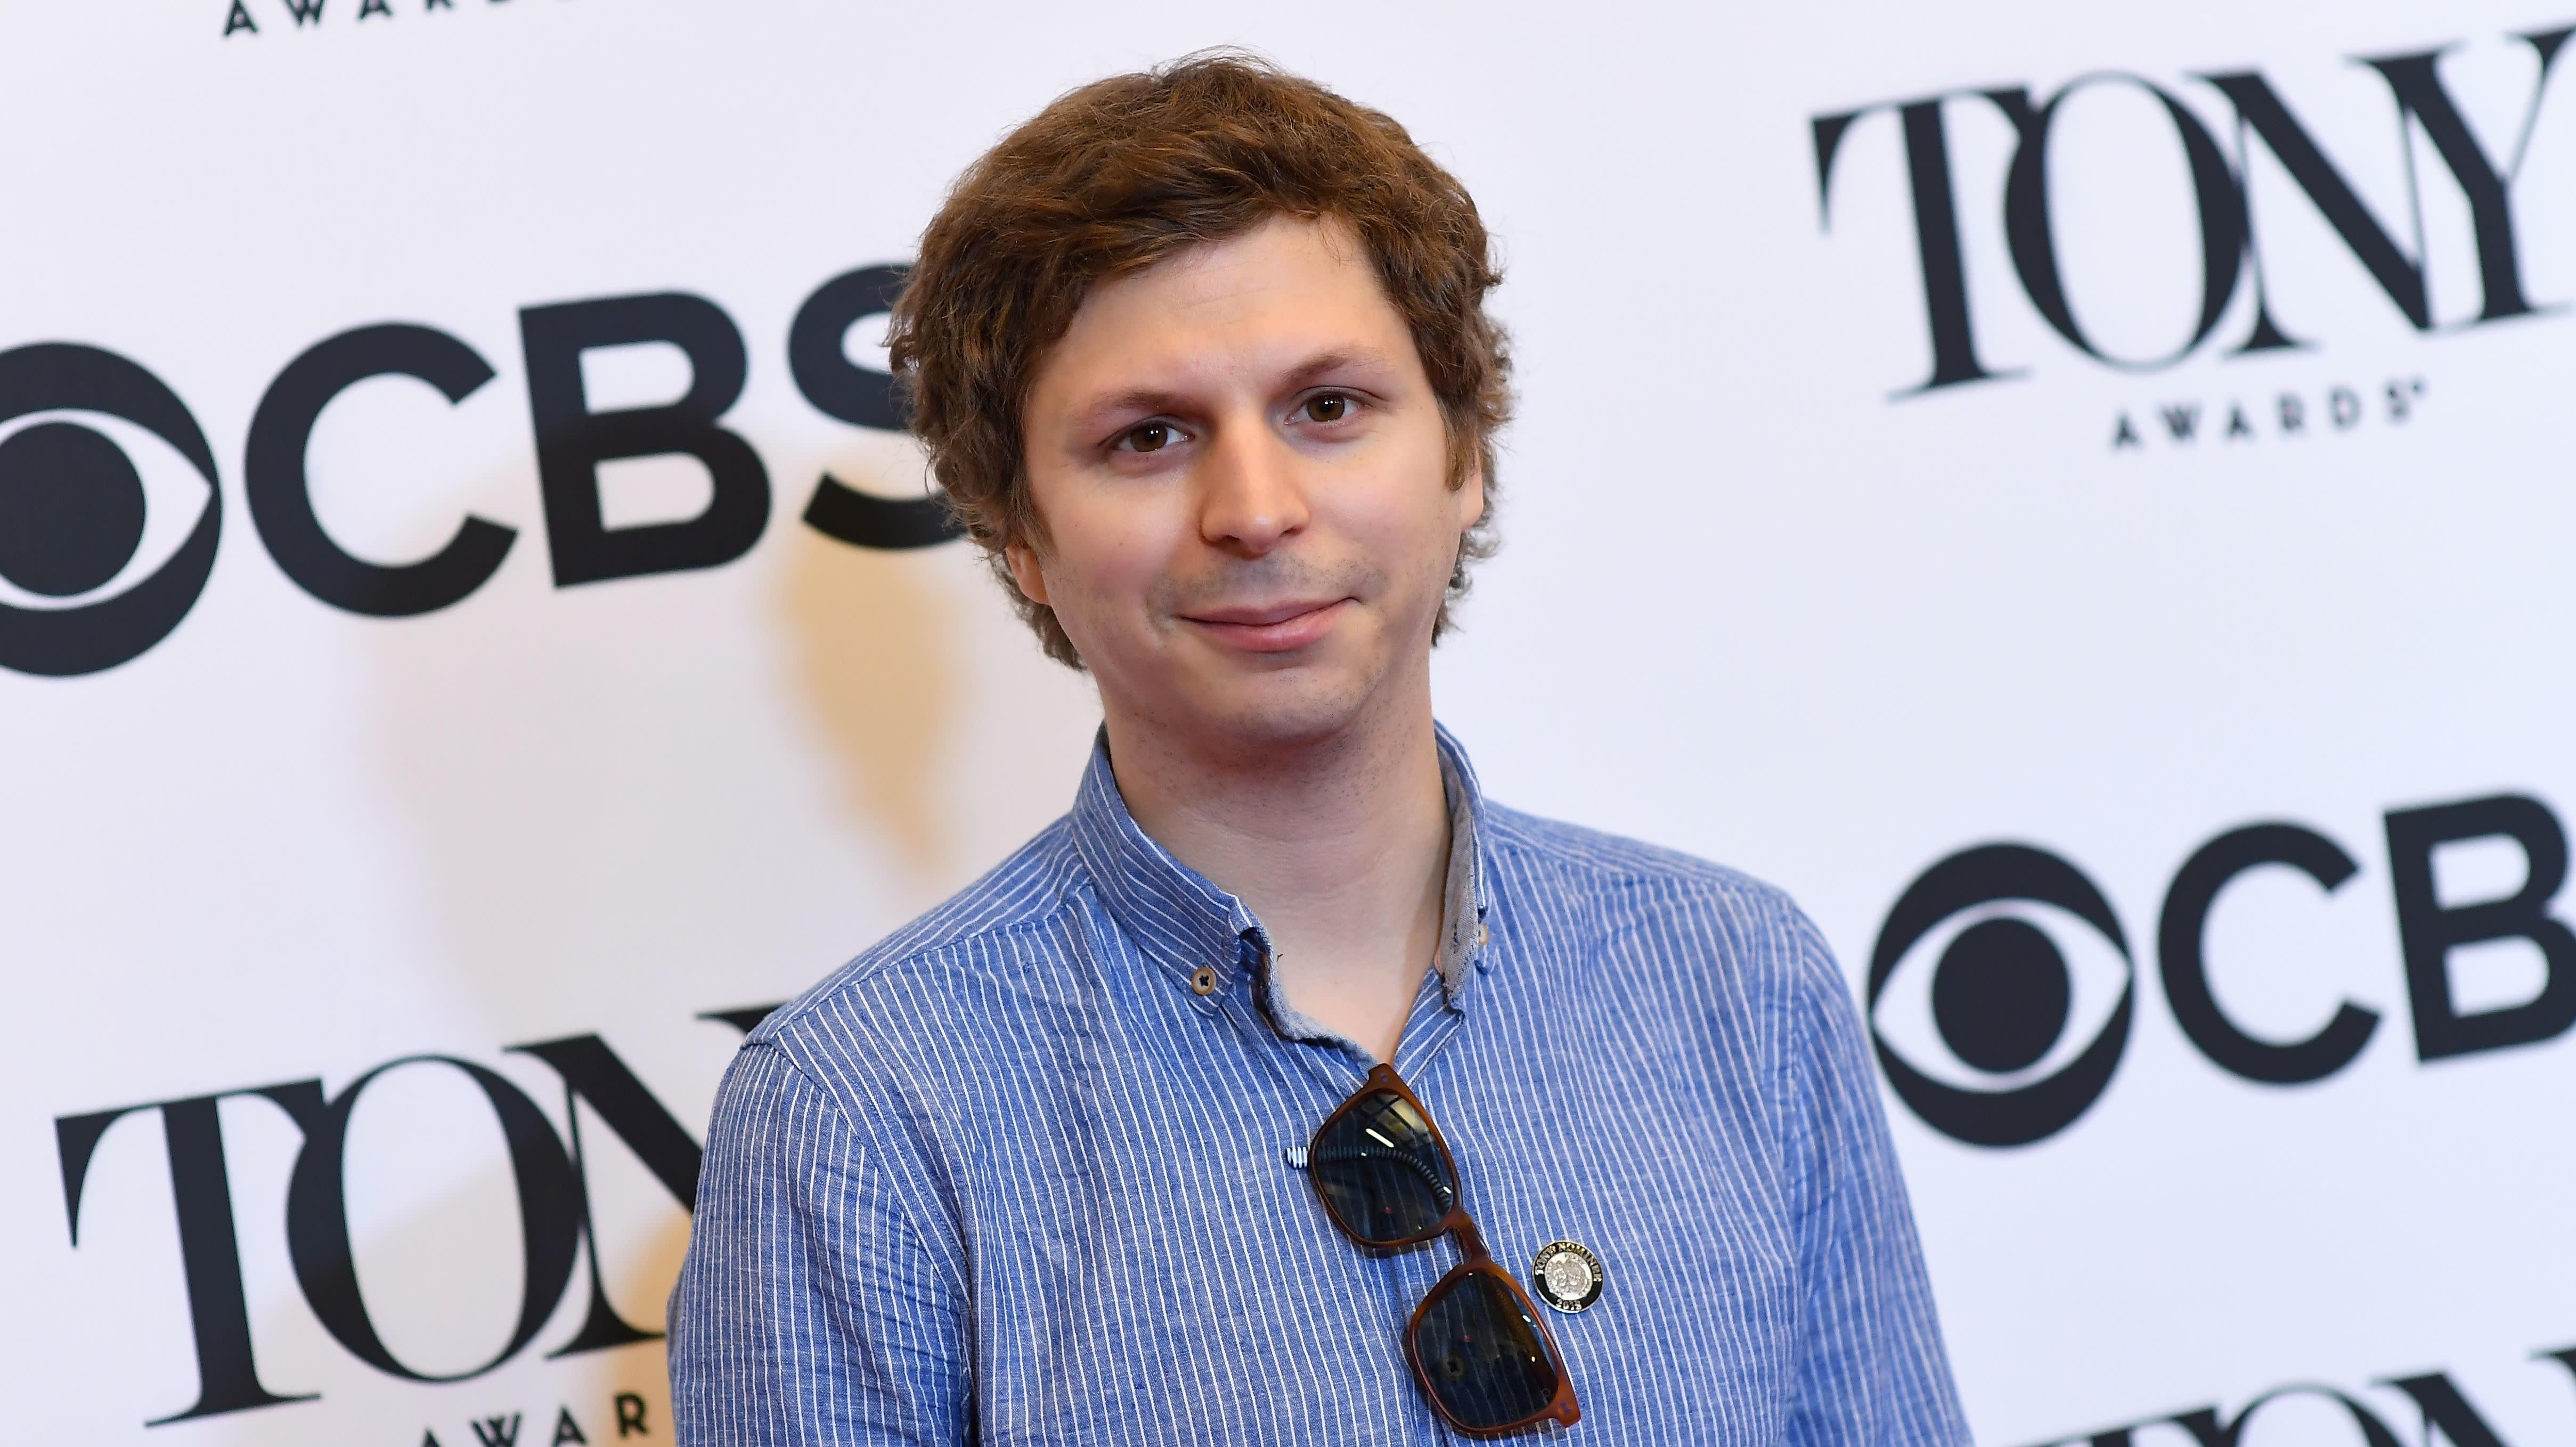 Michael Cera returning to TV for Amy Schumer series Life & Beth